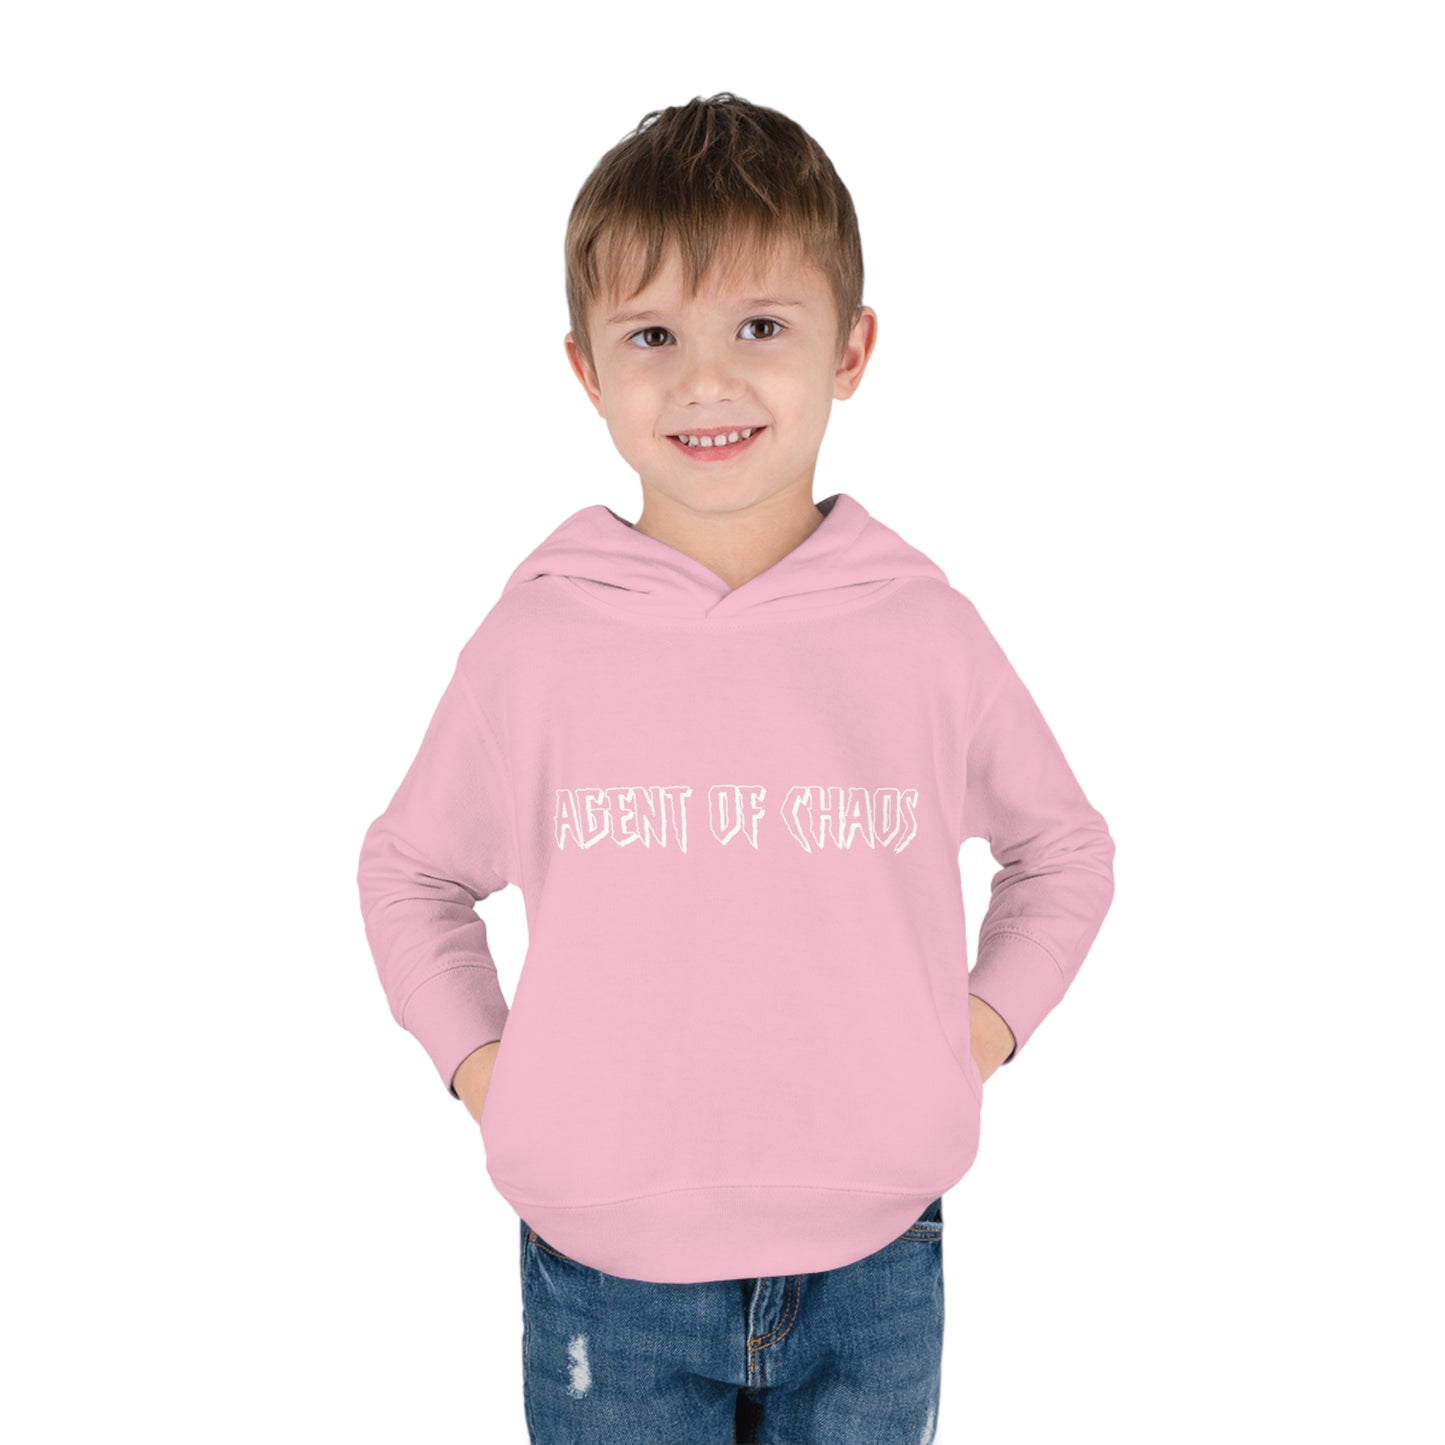 Agent of Chaos - wht - txt - Toddler Pullover Fleece Hoodie